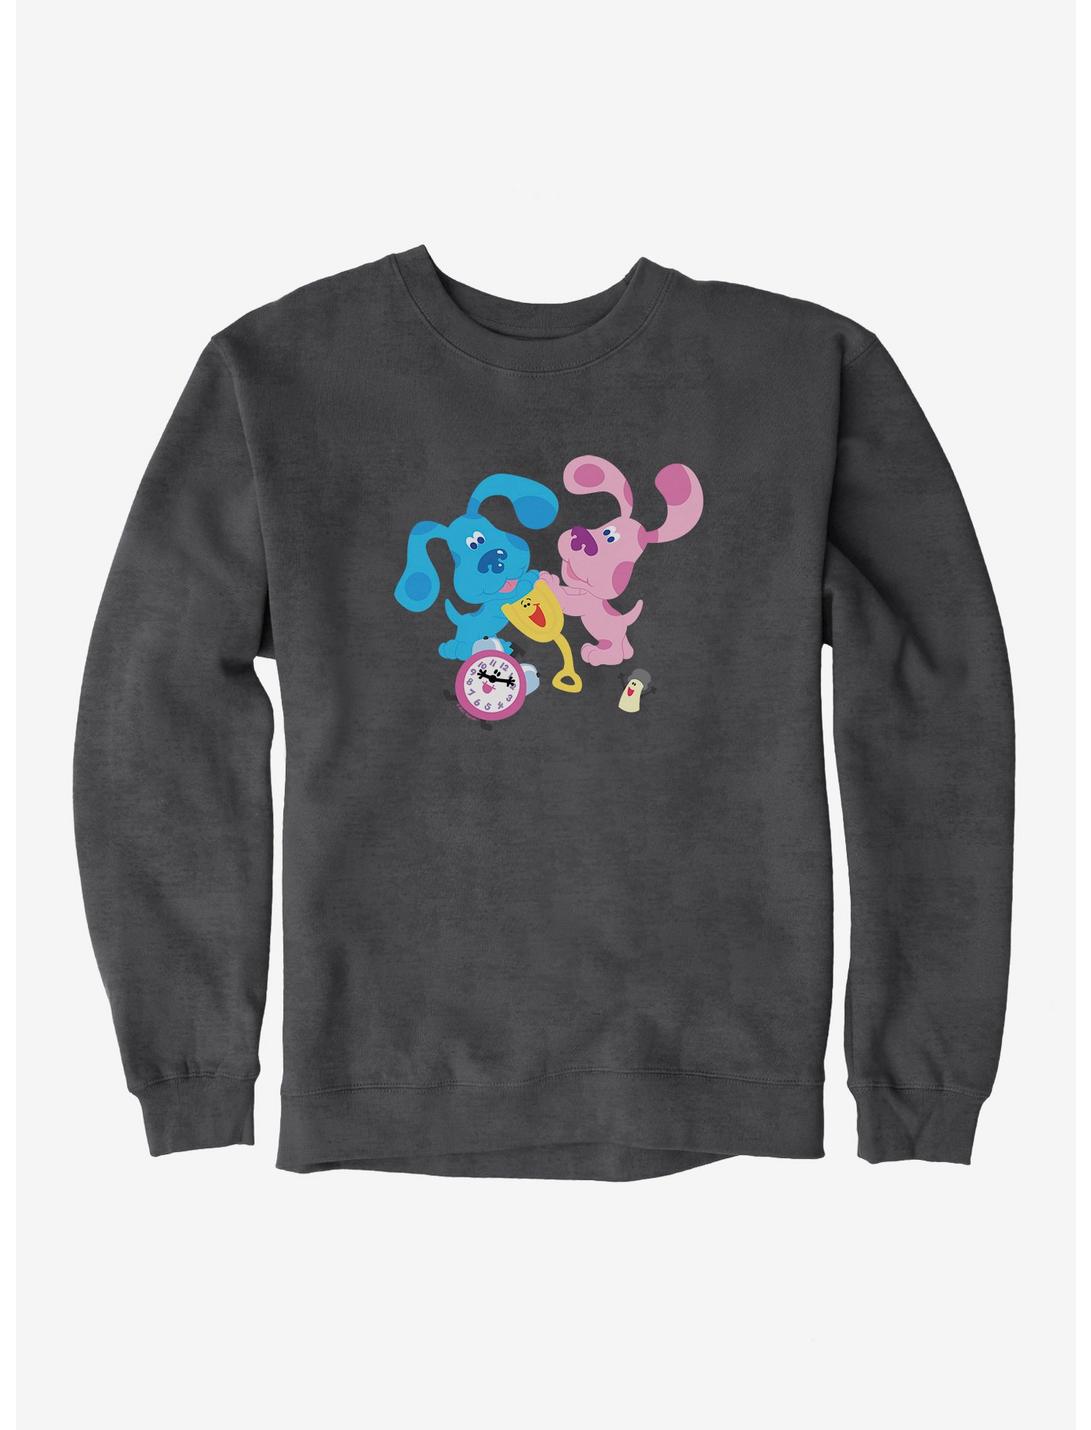 Blue's Clues Group Playtime Sweatshirt, CHARCOAL HEATHER, hi-res